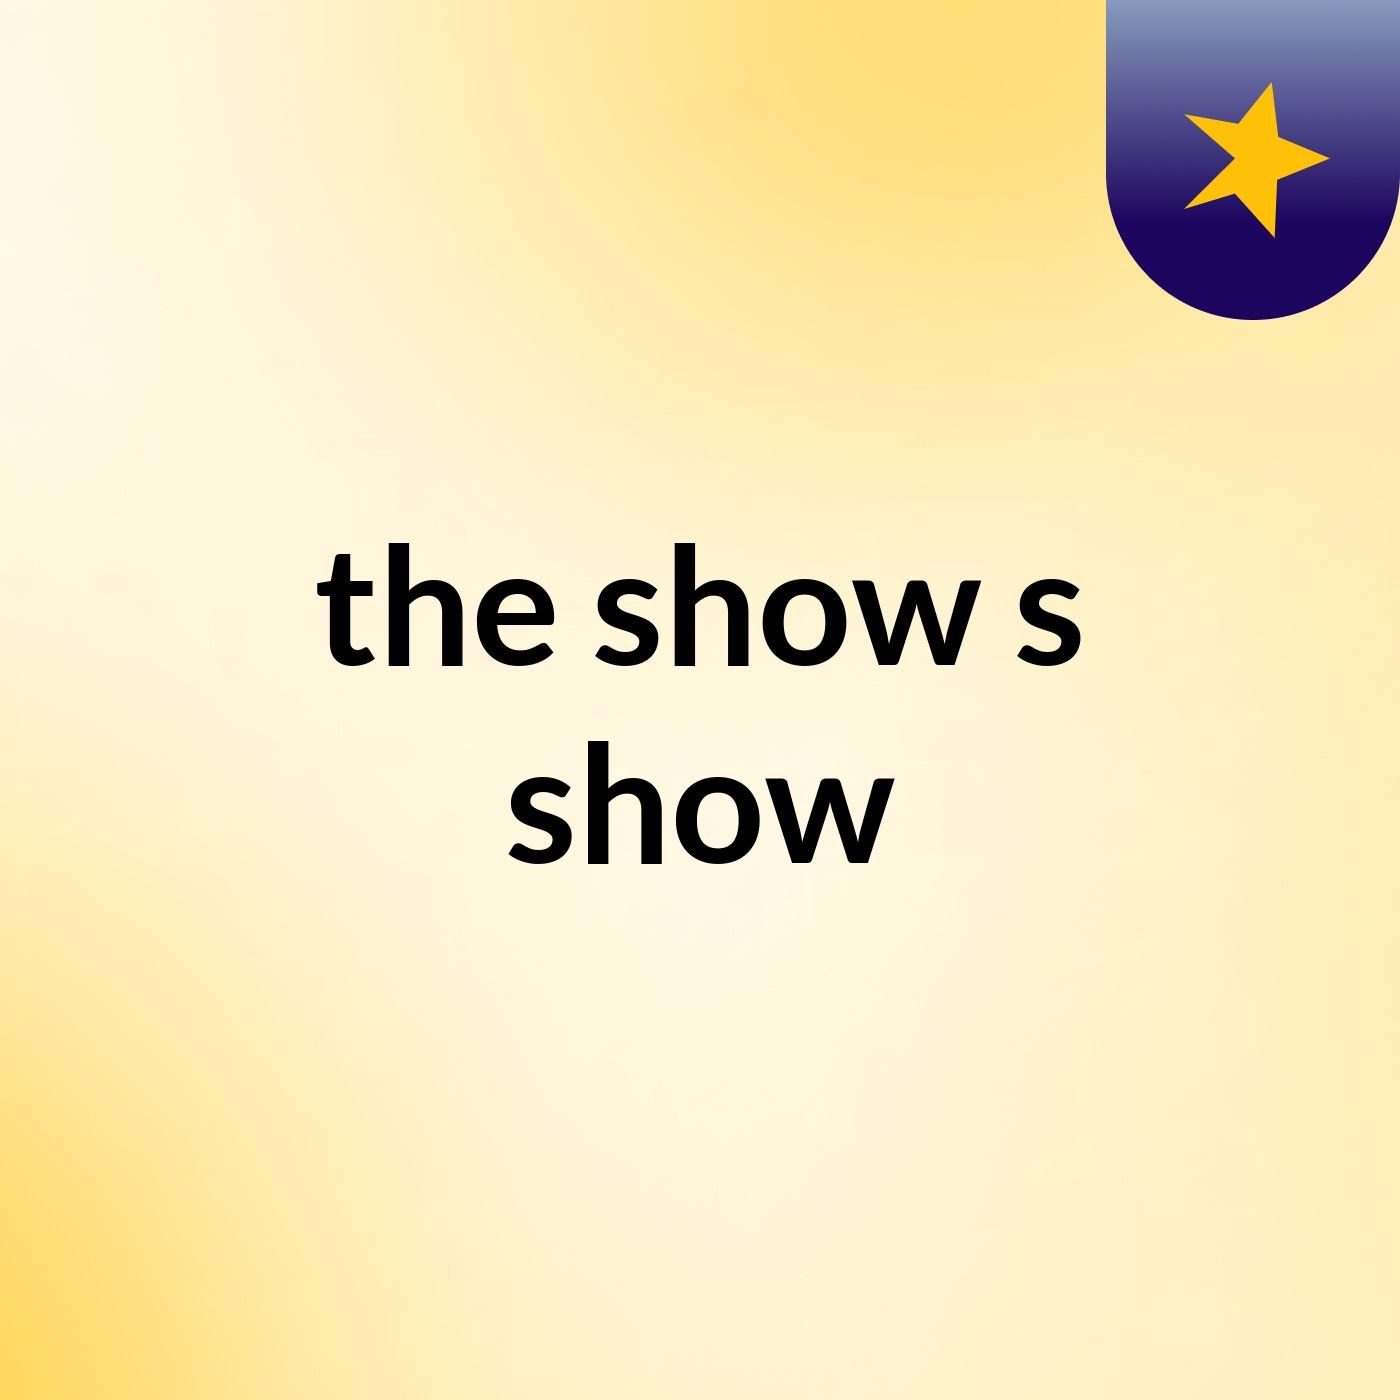 the show's show